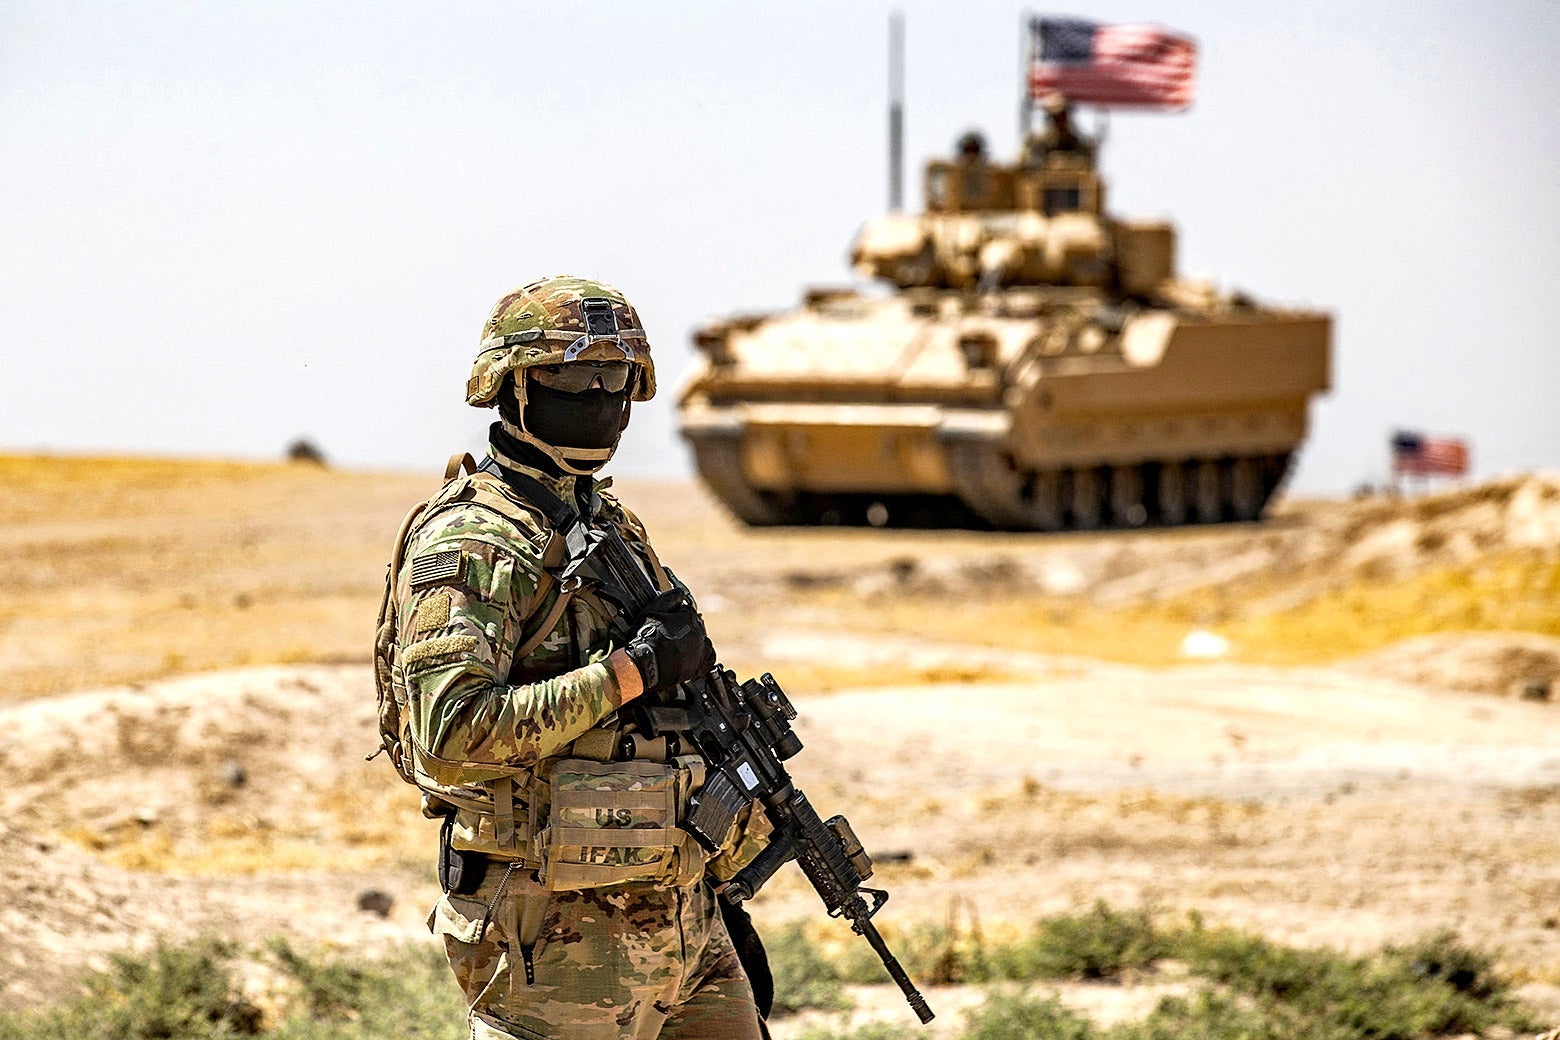 An American soldier wearing a black mask and holding a gun stands in a desert landscape with an American tank in the distance